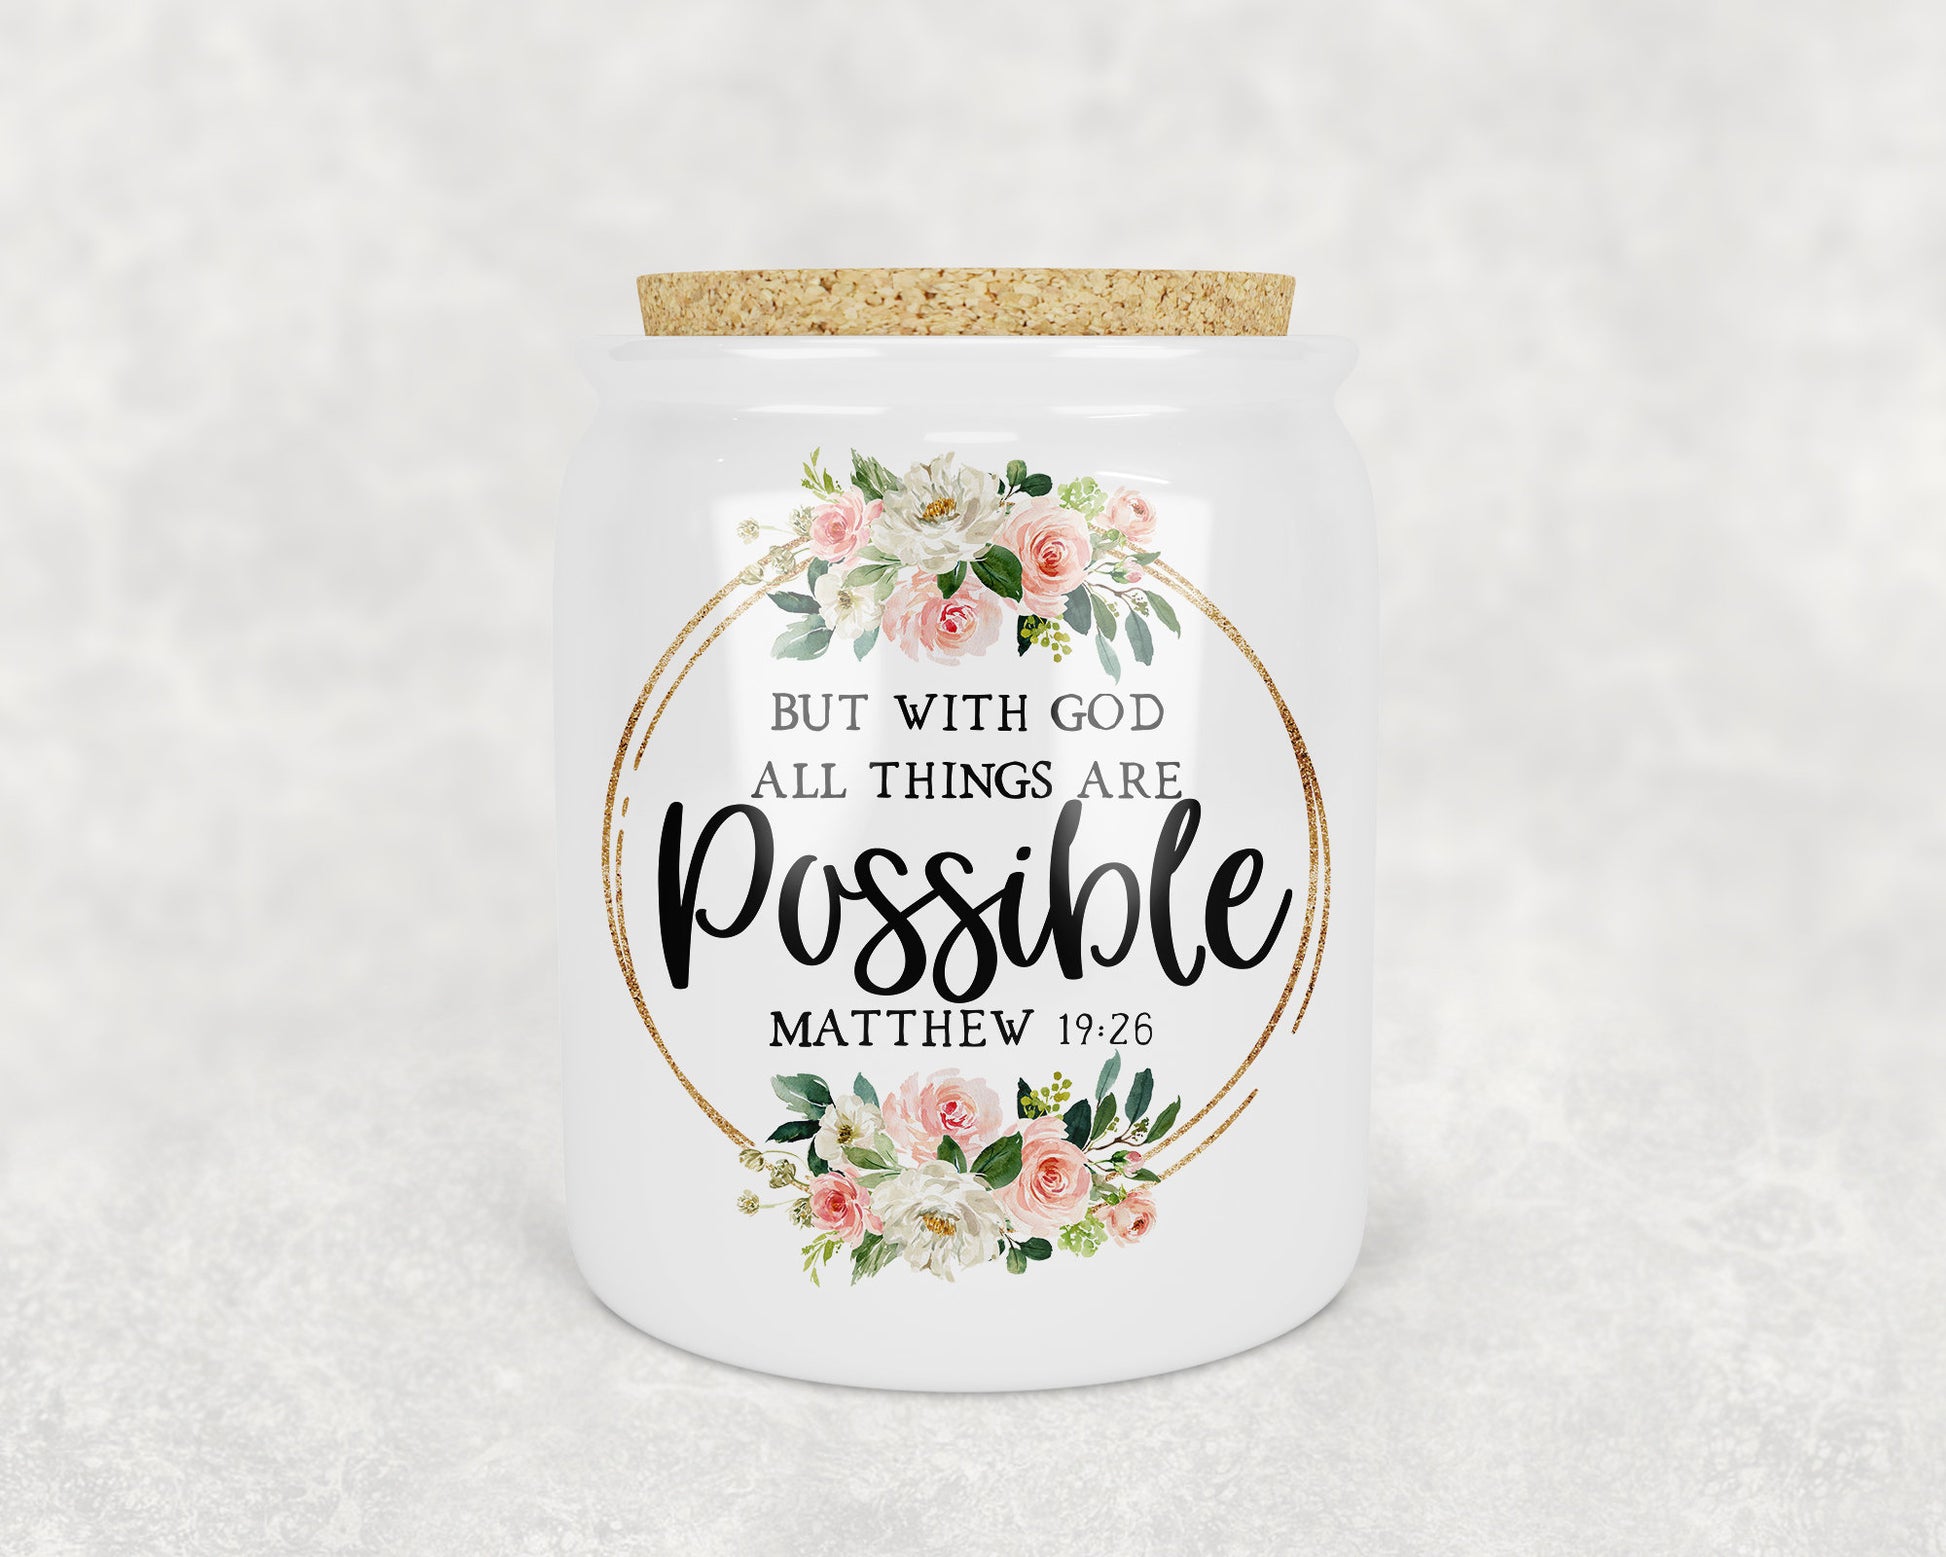 All Things are Possible Bible Verse Porcelain Treat Jar - Schoppix Gifts